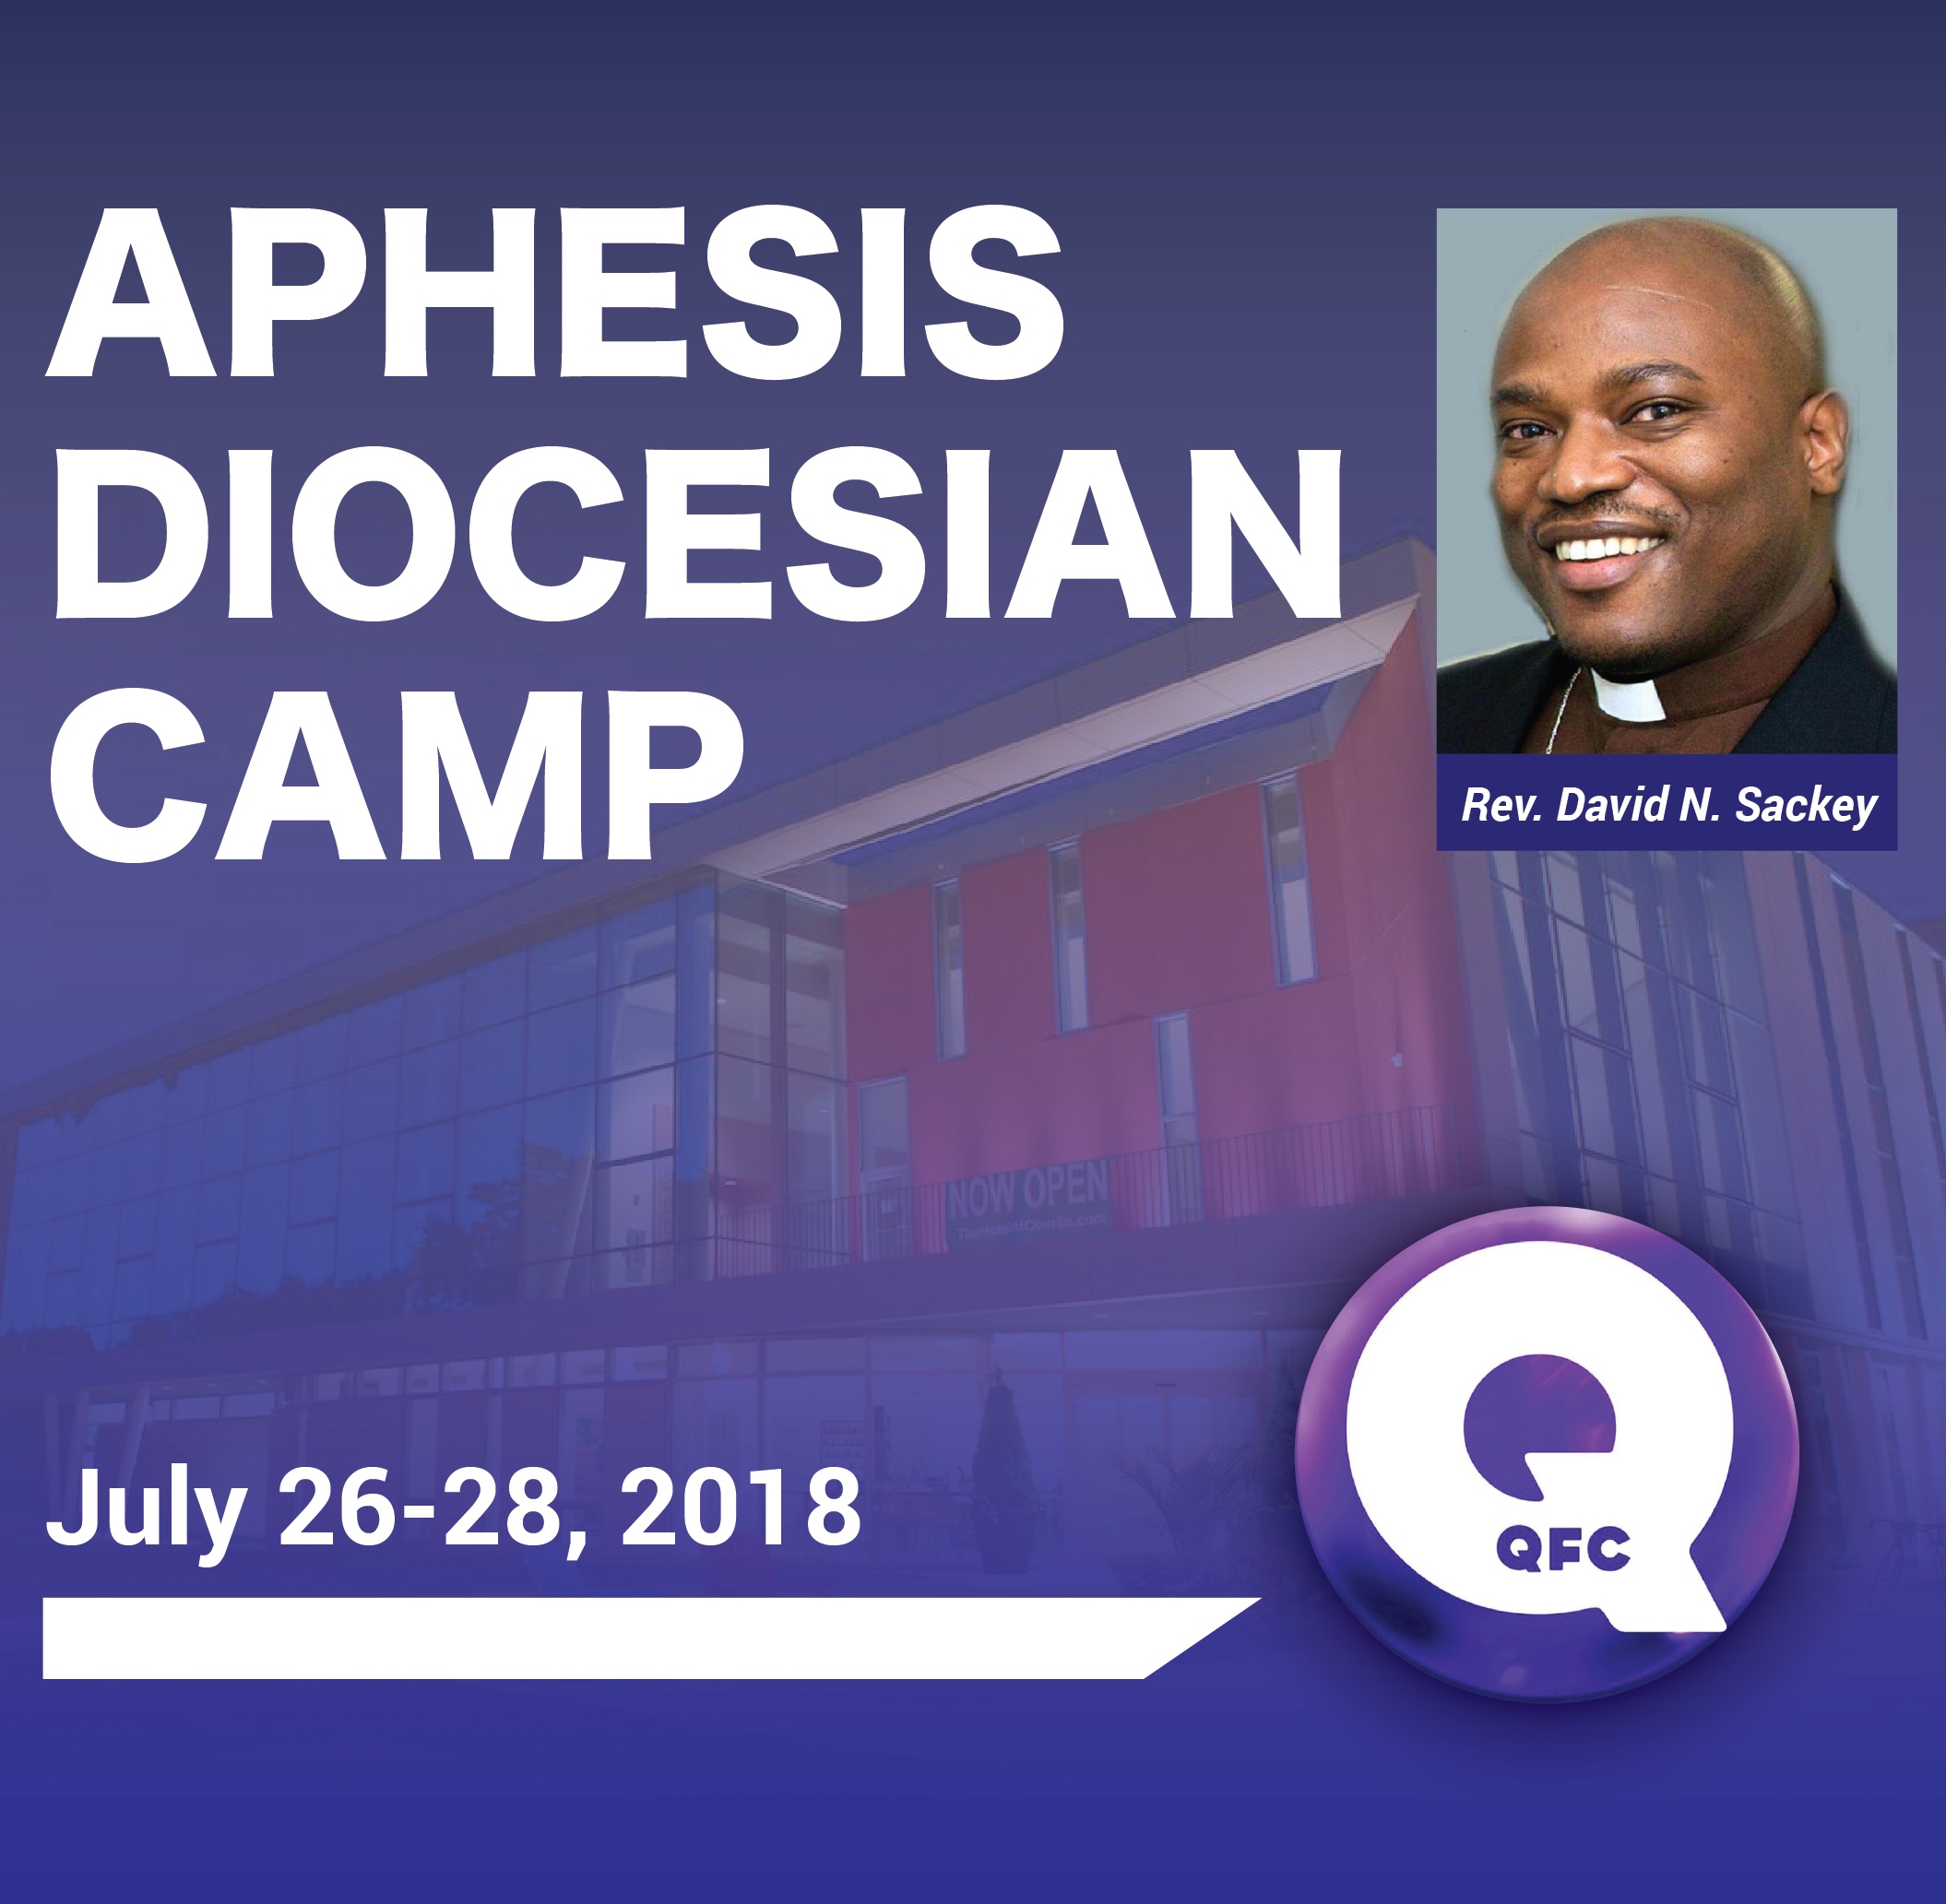 Aphesis Diocesan Camp 2018 - 28th July Session 1